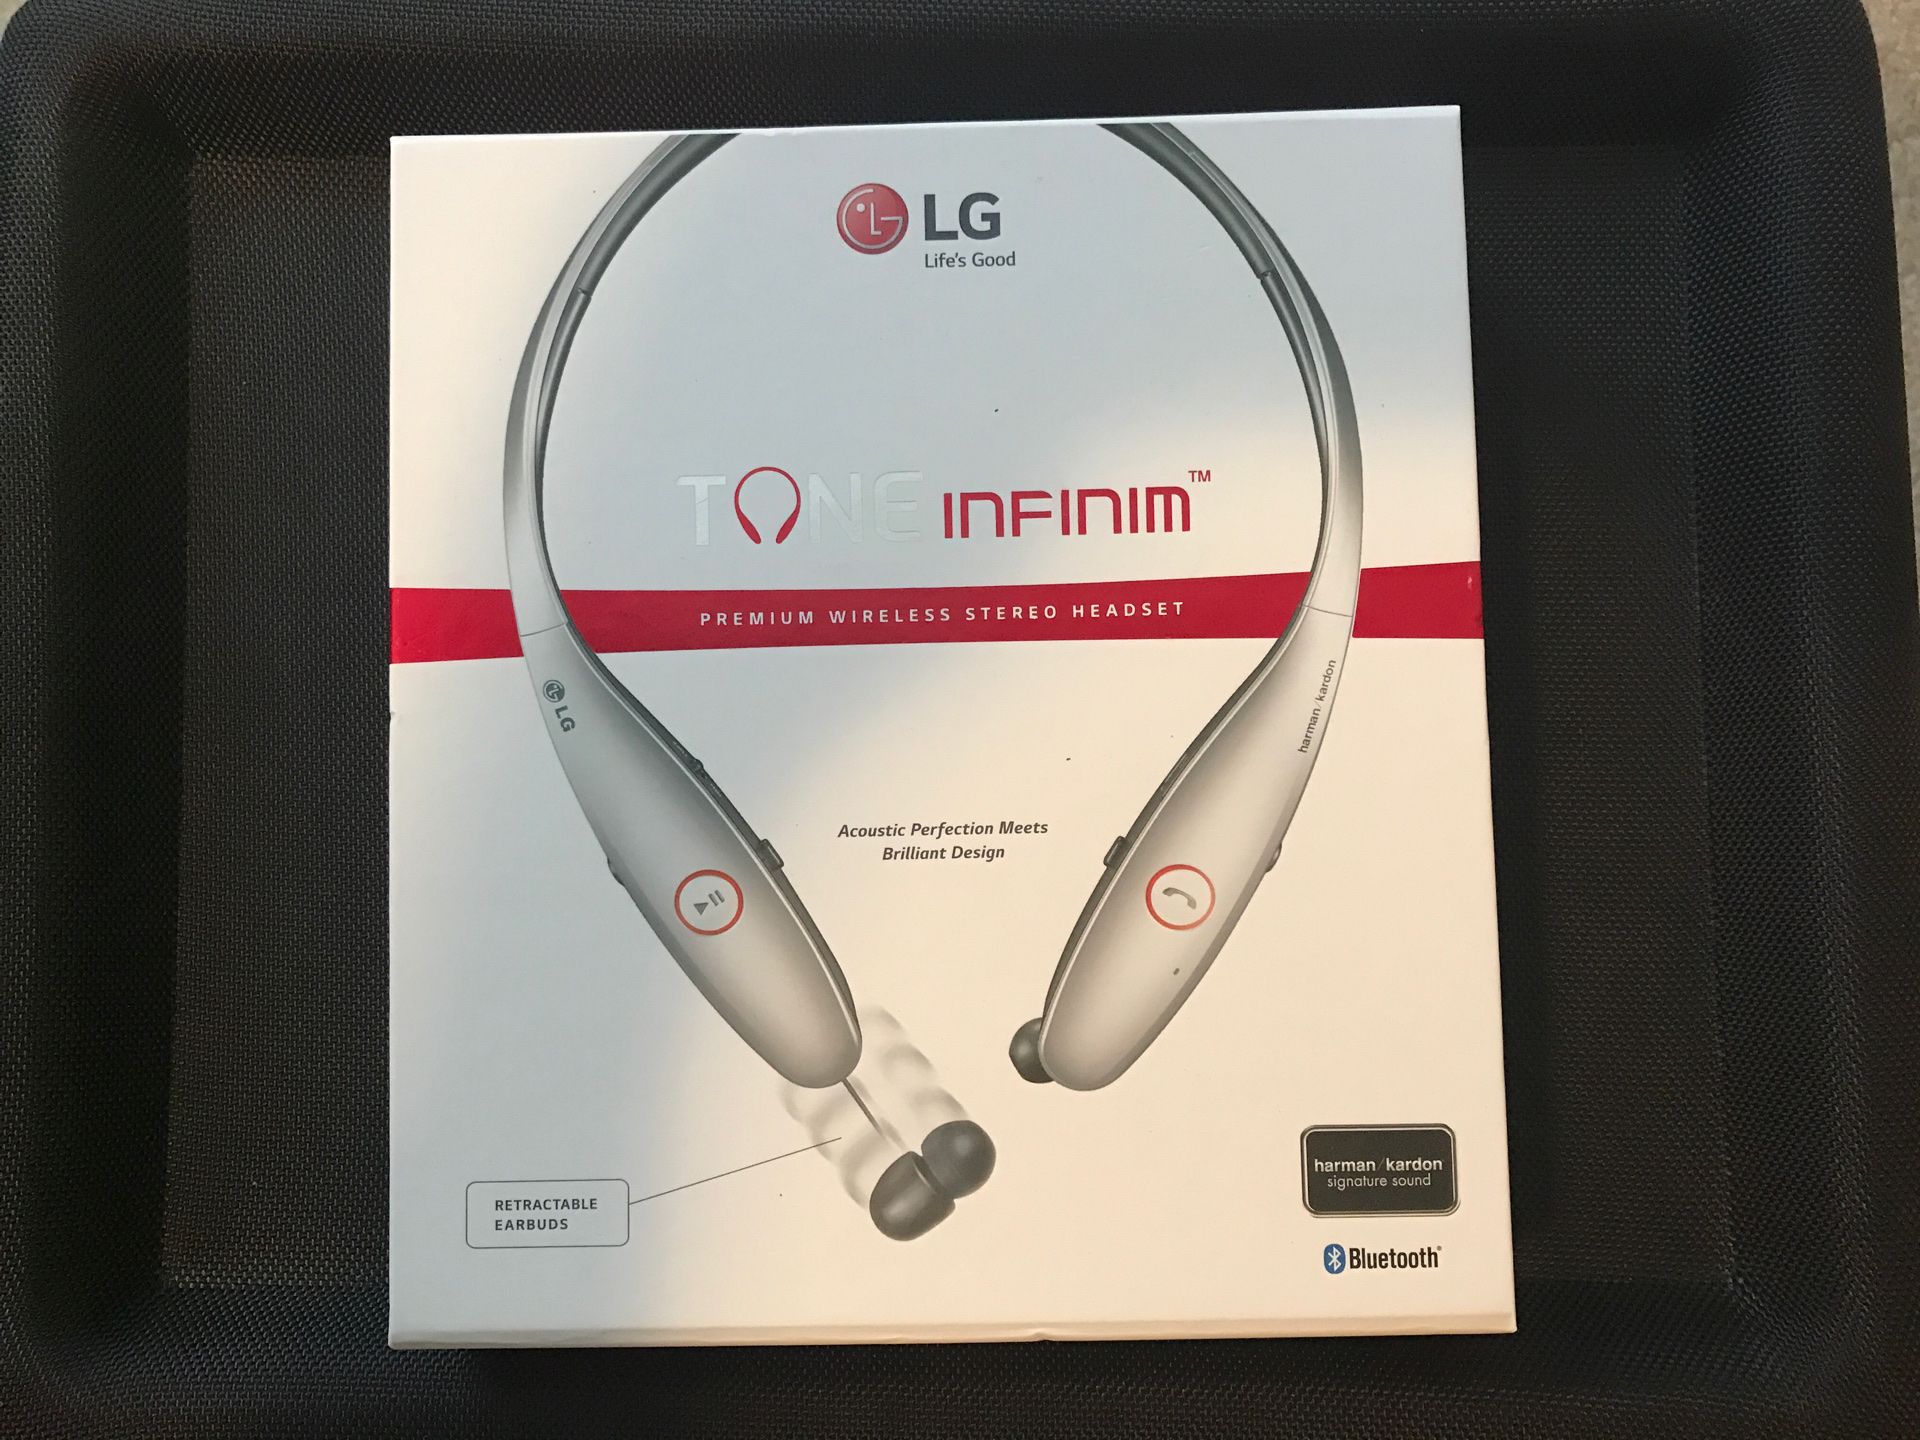 LG Tone Infinim HBS-900 Bluetooth Stereo Sale in BRUSHY FORK, WV - OfferUp